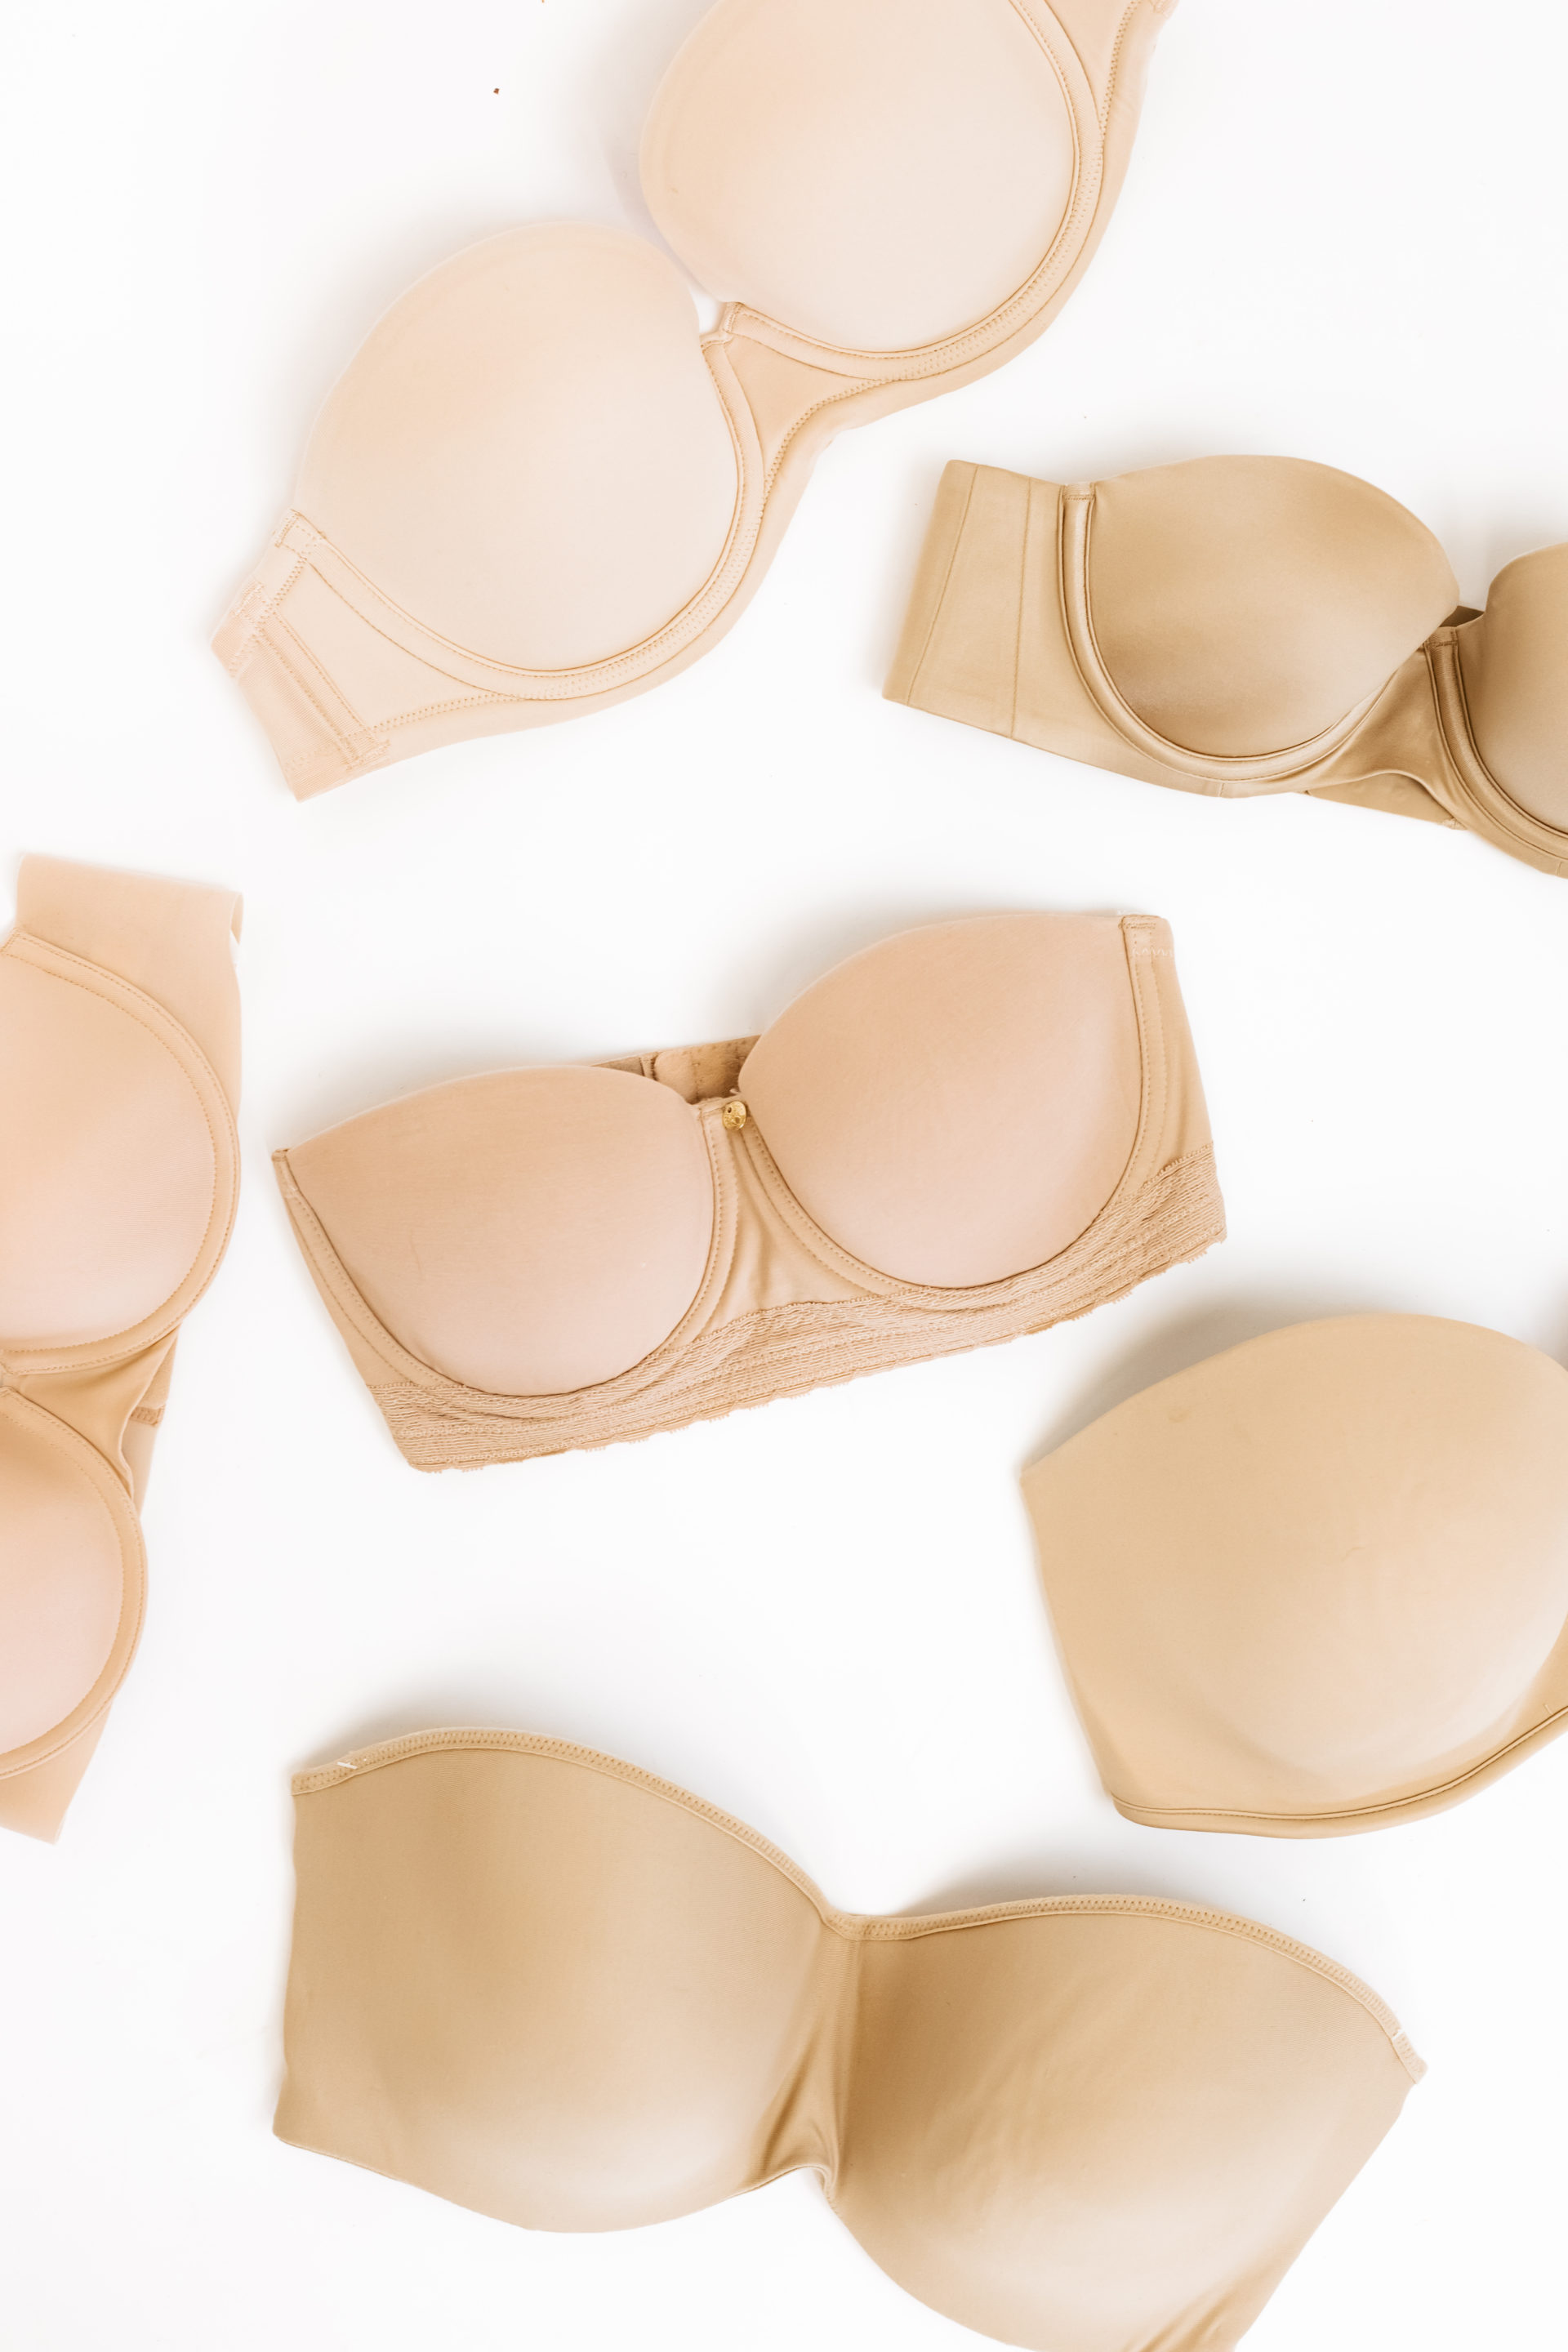 Soma Intimates - Fans of our Vanishing Back® bras lovingly call